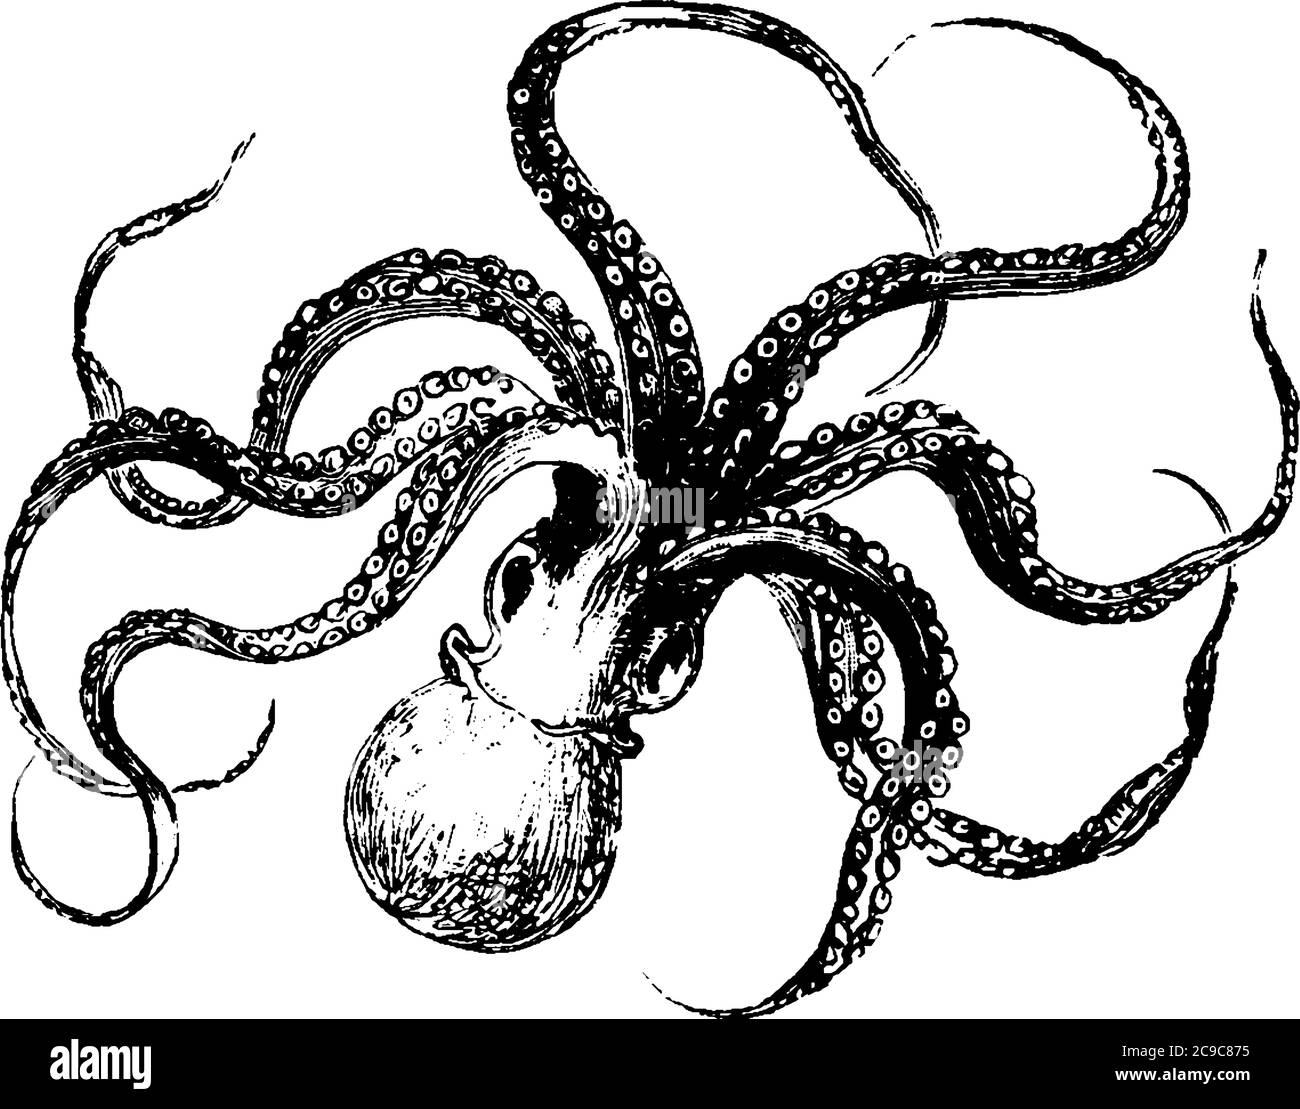 Octopus is a mollusk having soft body with eight limbs, vintage line drawing or engraving illustration. Stock Vector